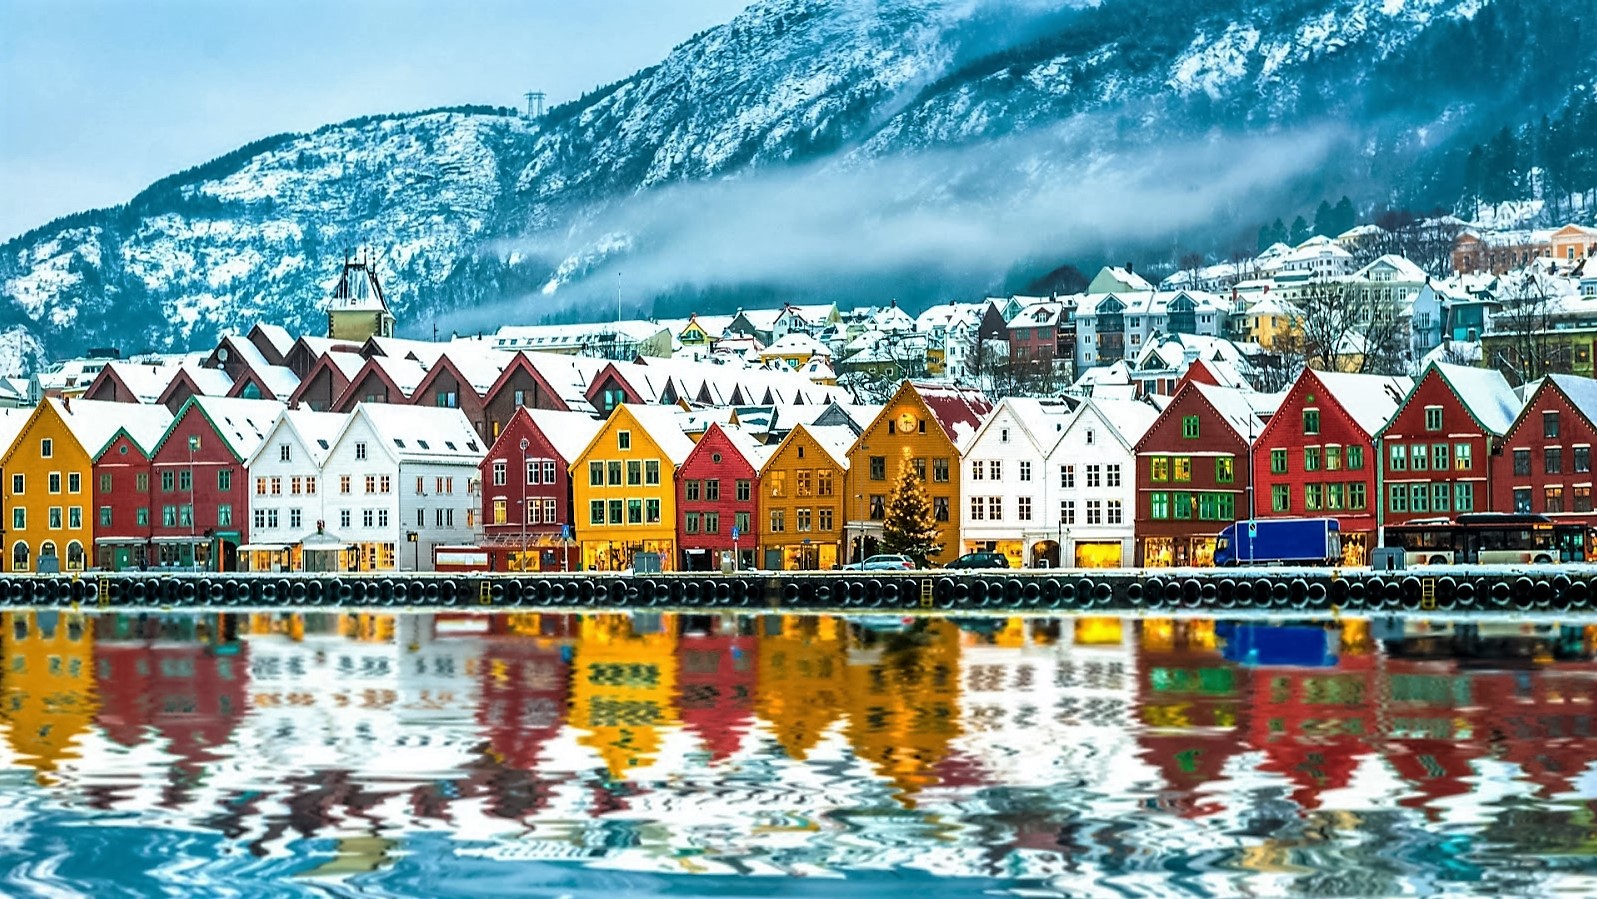 City, Lights and Love of Norway